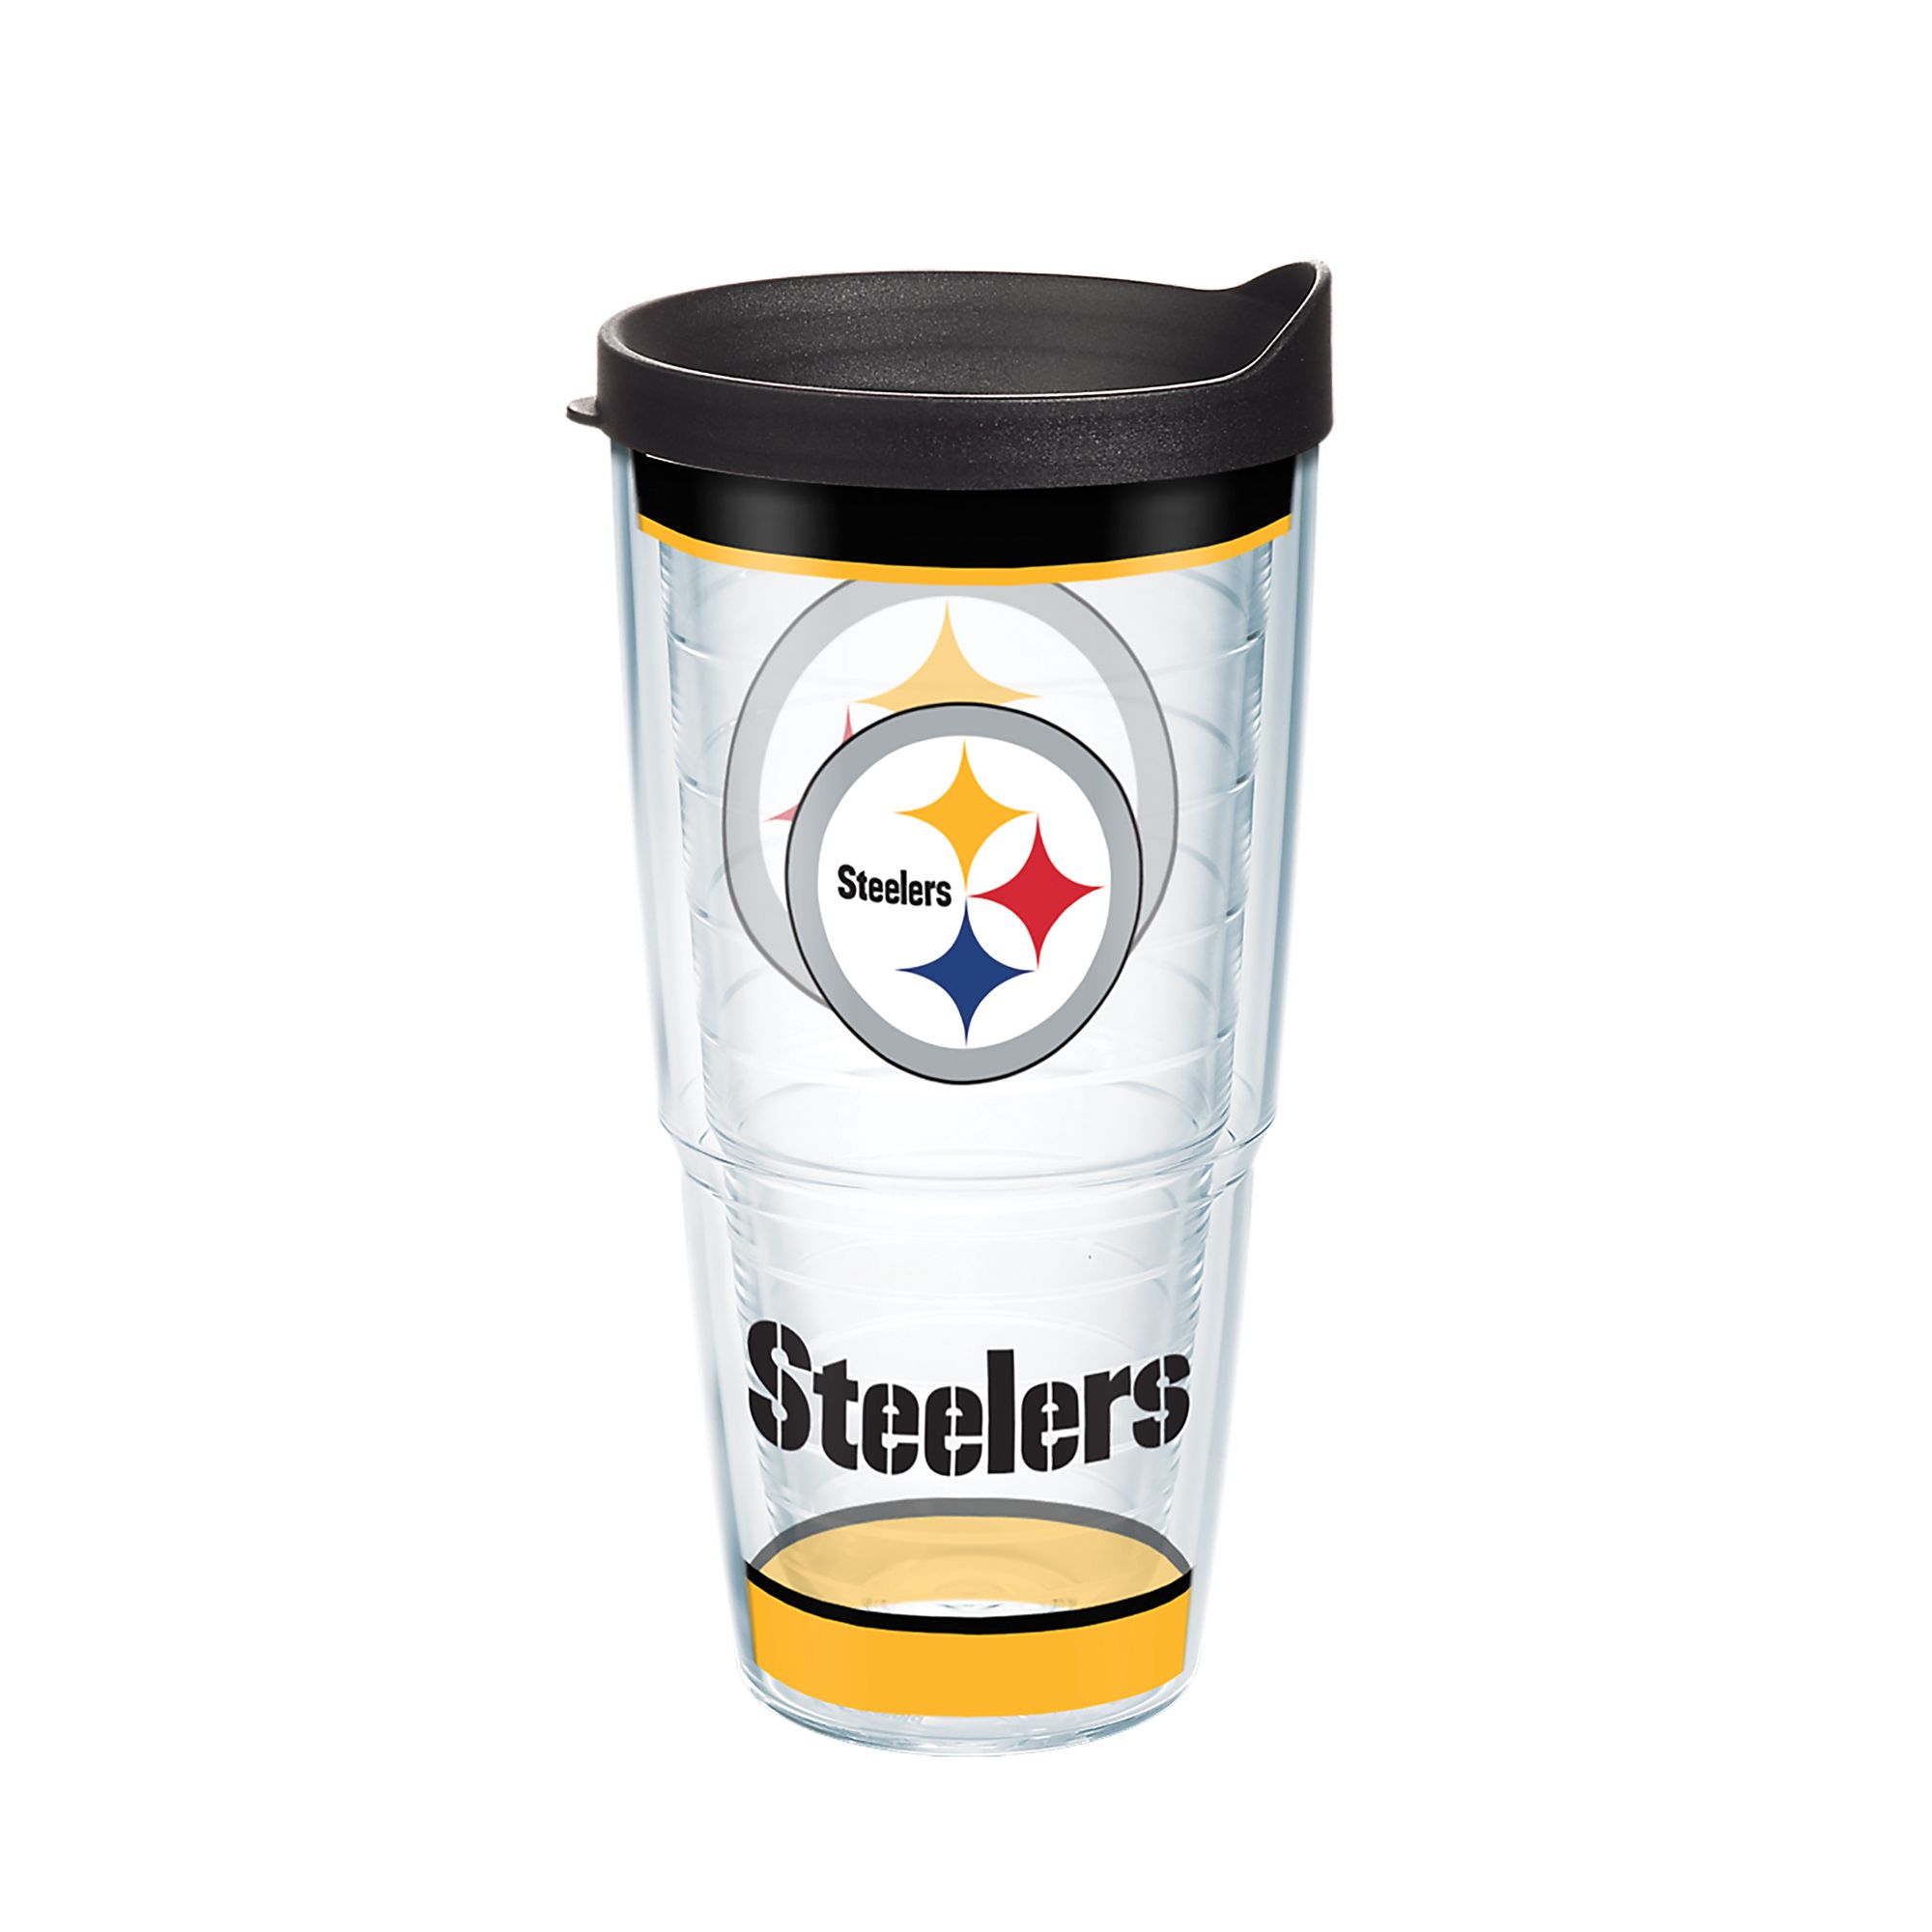  Tervis Made in USA Double Walled NFL® Pittsburgh